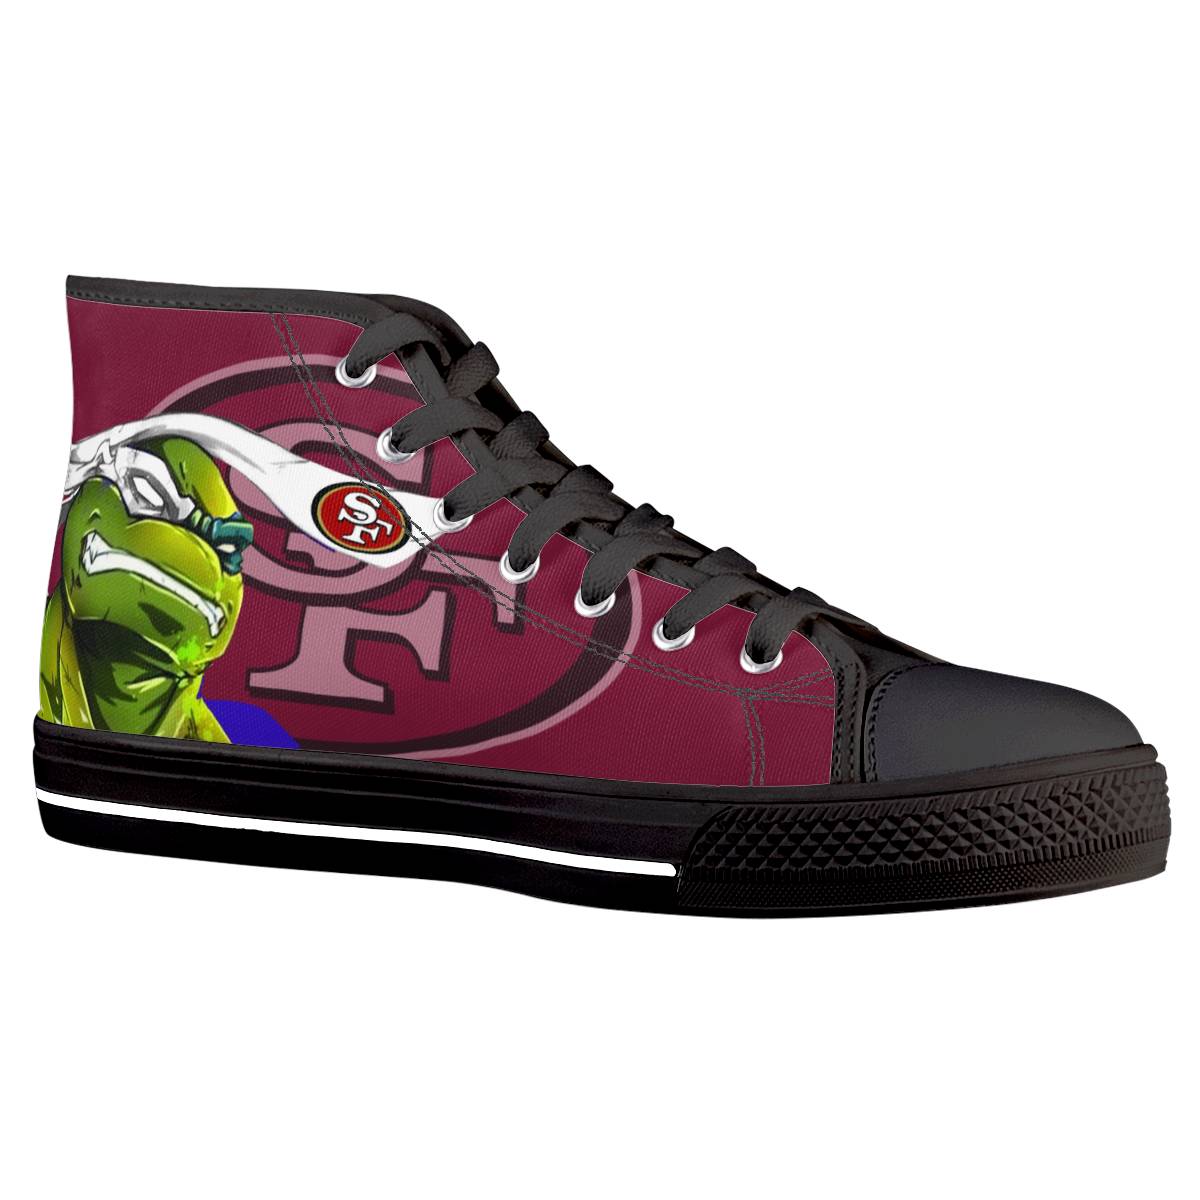 Women's San Francisco 49ers High Top Canvas Sneakers 006